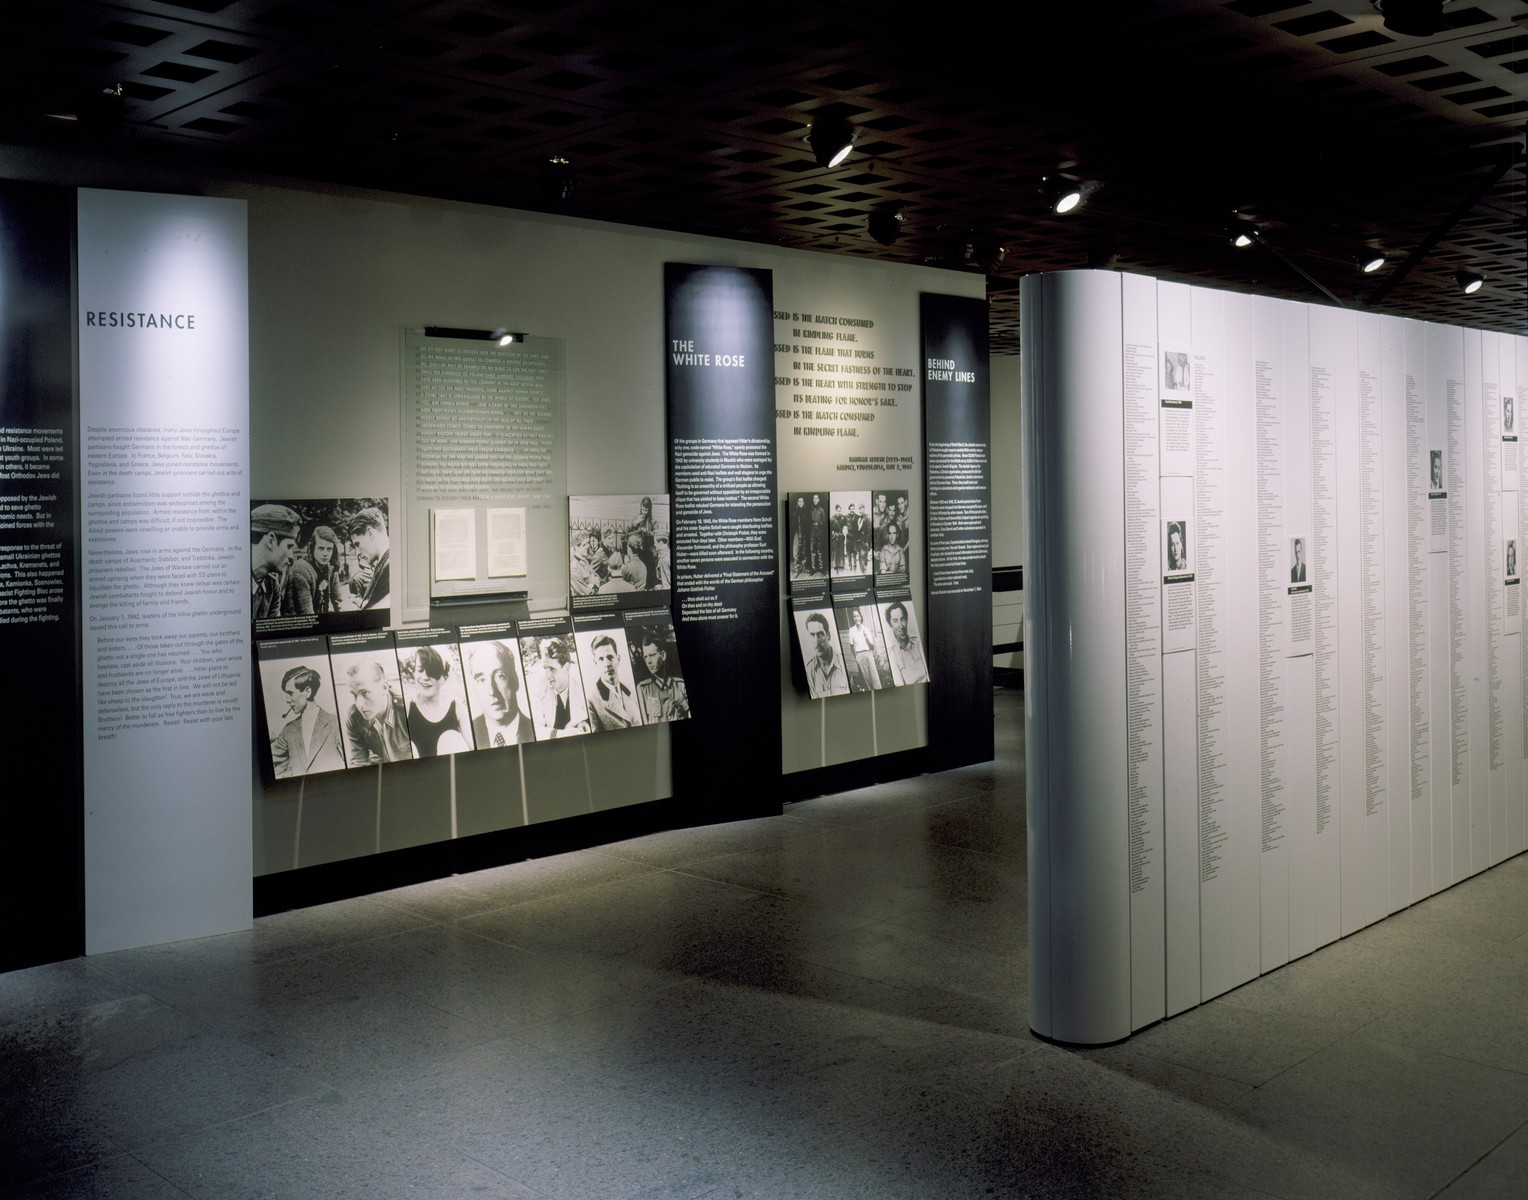 View of the Resistance segment on the second floor of the permanent exhibition at the U.S. Holocaust Memorial Museum, including the "White Rose" and "Behind Enemy Lines" panels and one side of the "Rescuers Wall".